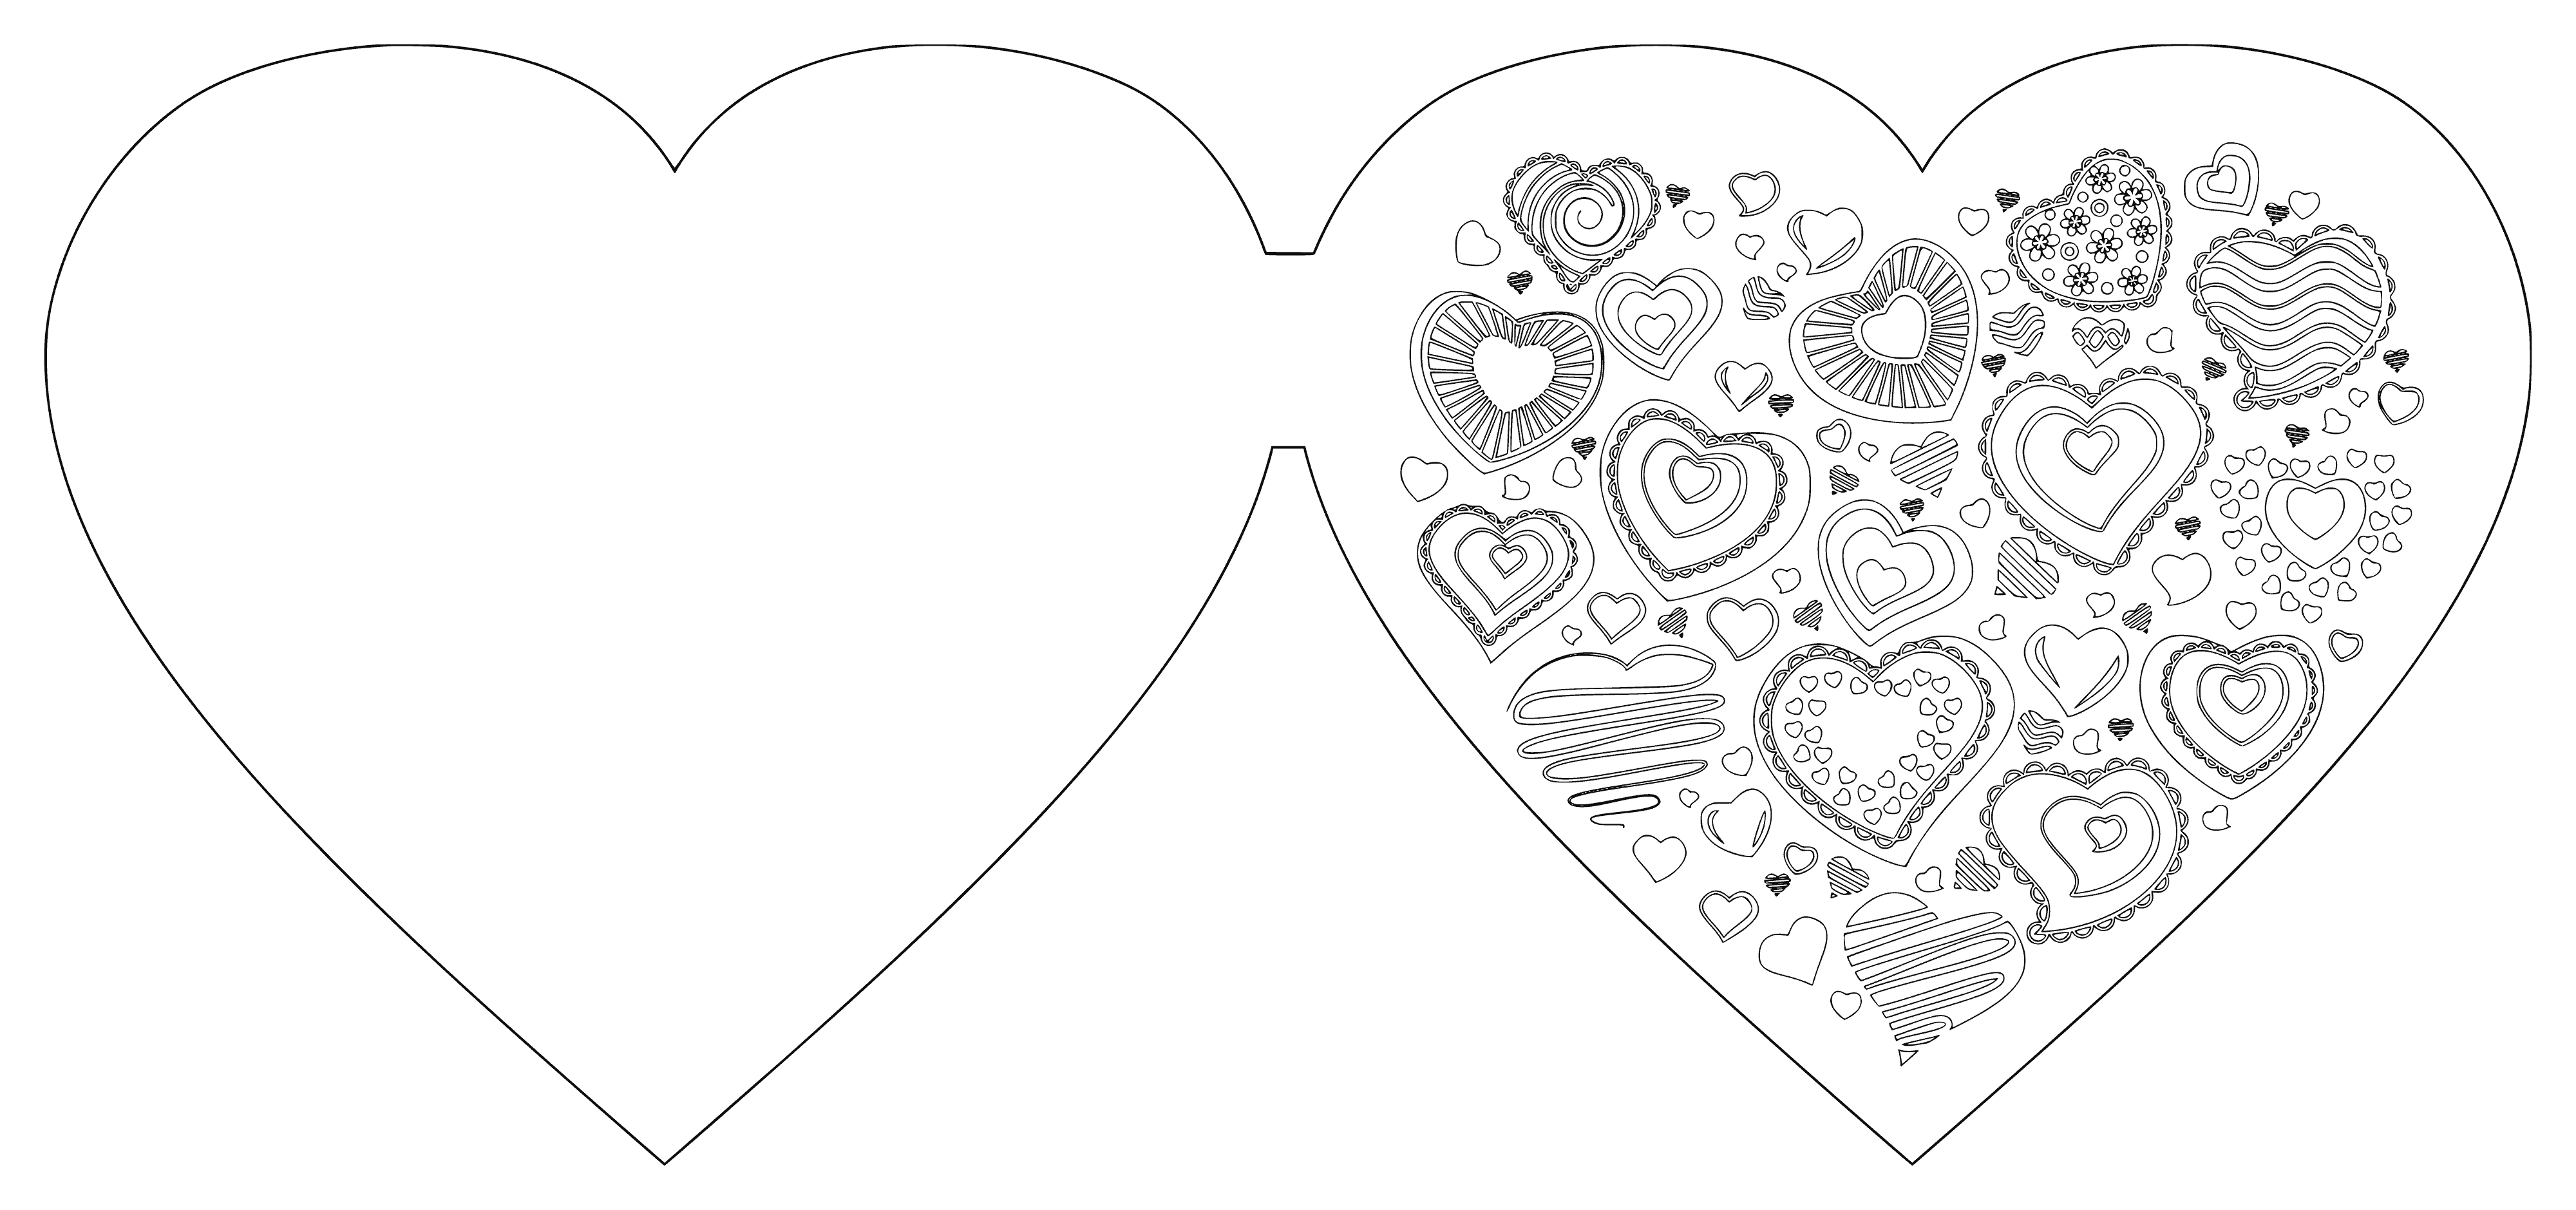 coloring page: Heart with spikes & spiral in center on black bg.